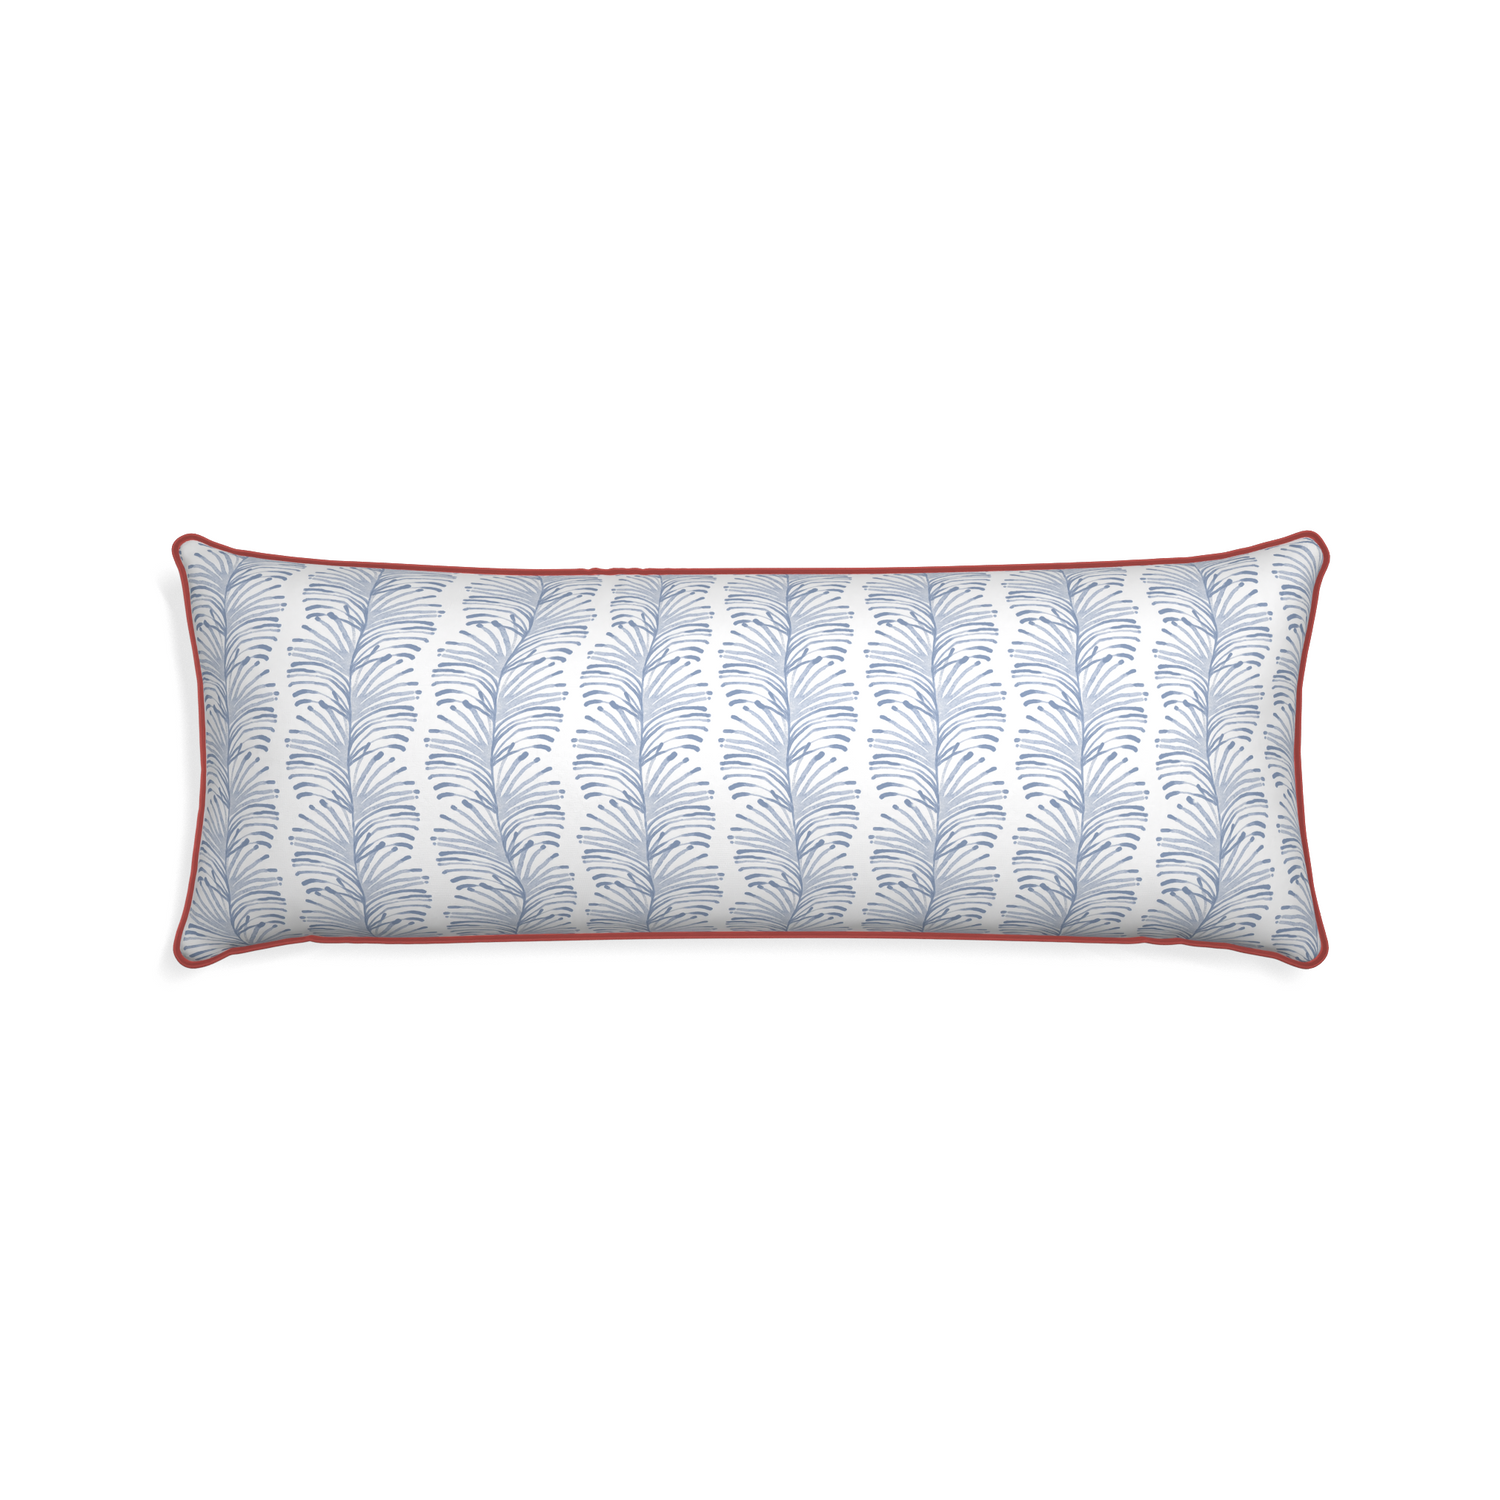 Xl-lumbar emma sky custom pillow with c piping on white background